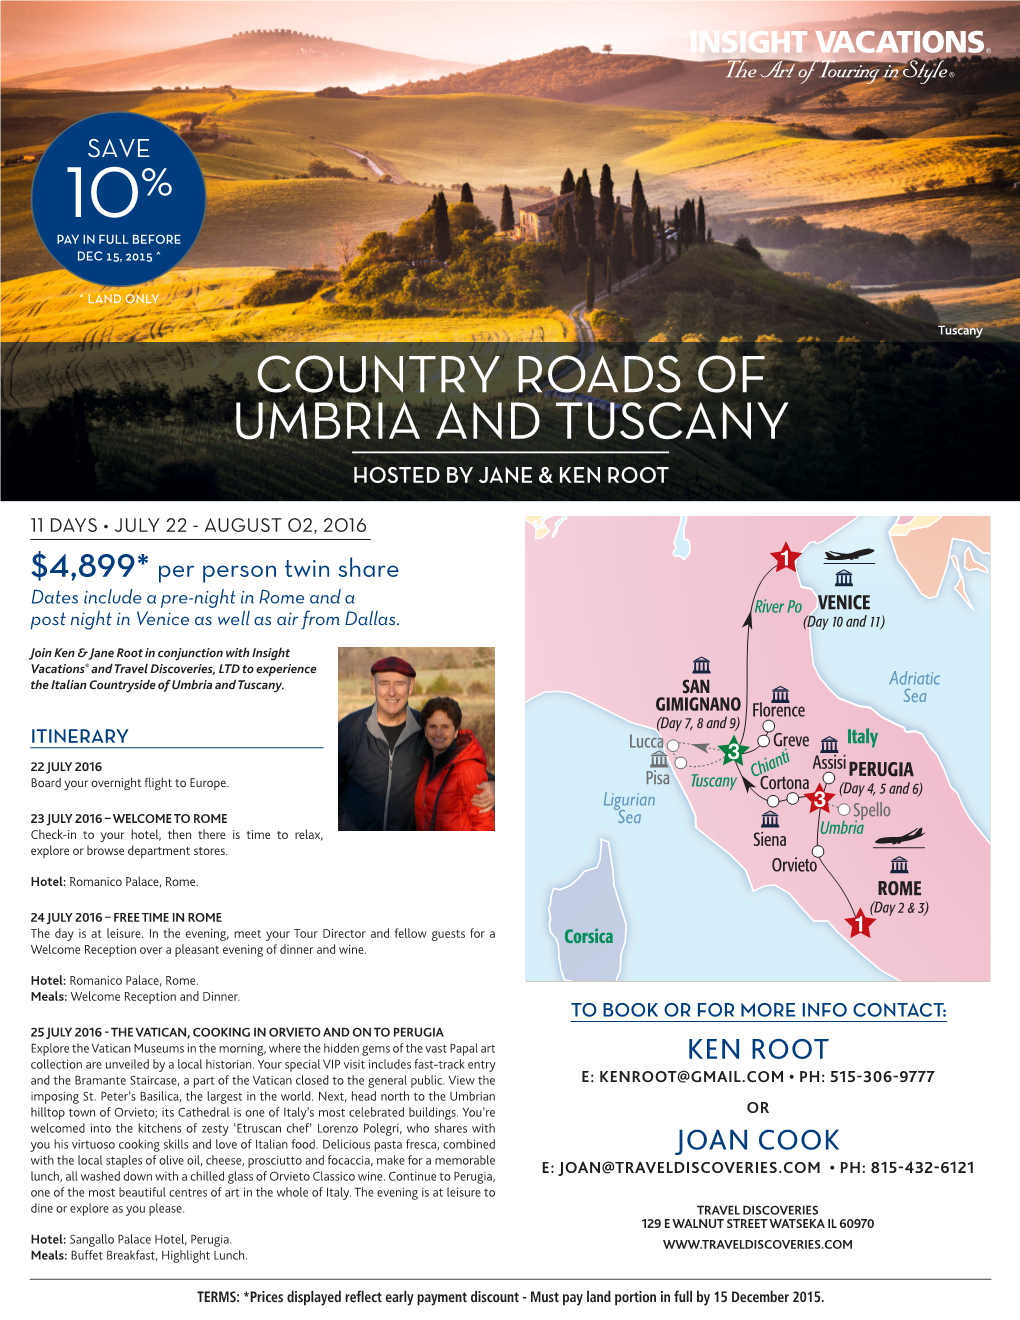 Country Roads of Umbria and Tuscany Hosted by Jane & Ken Root